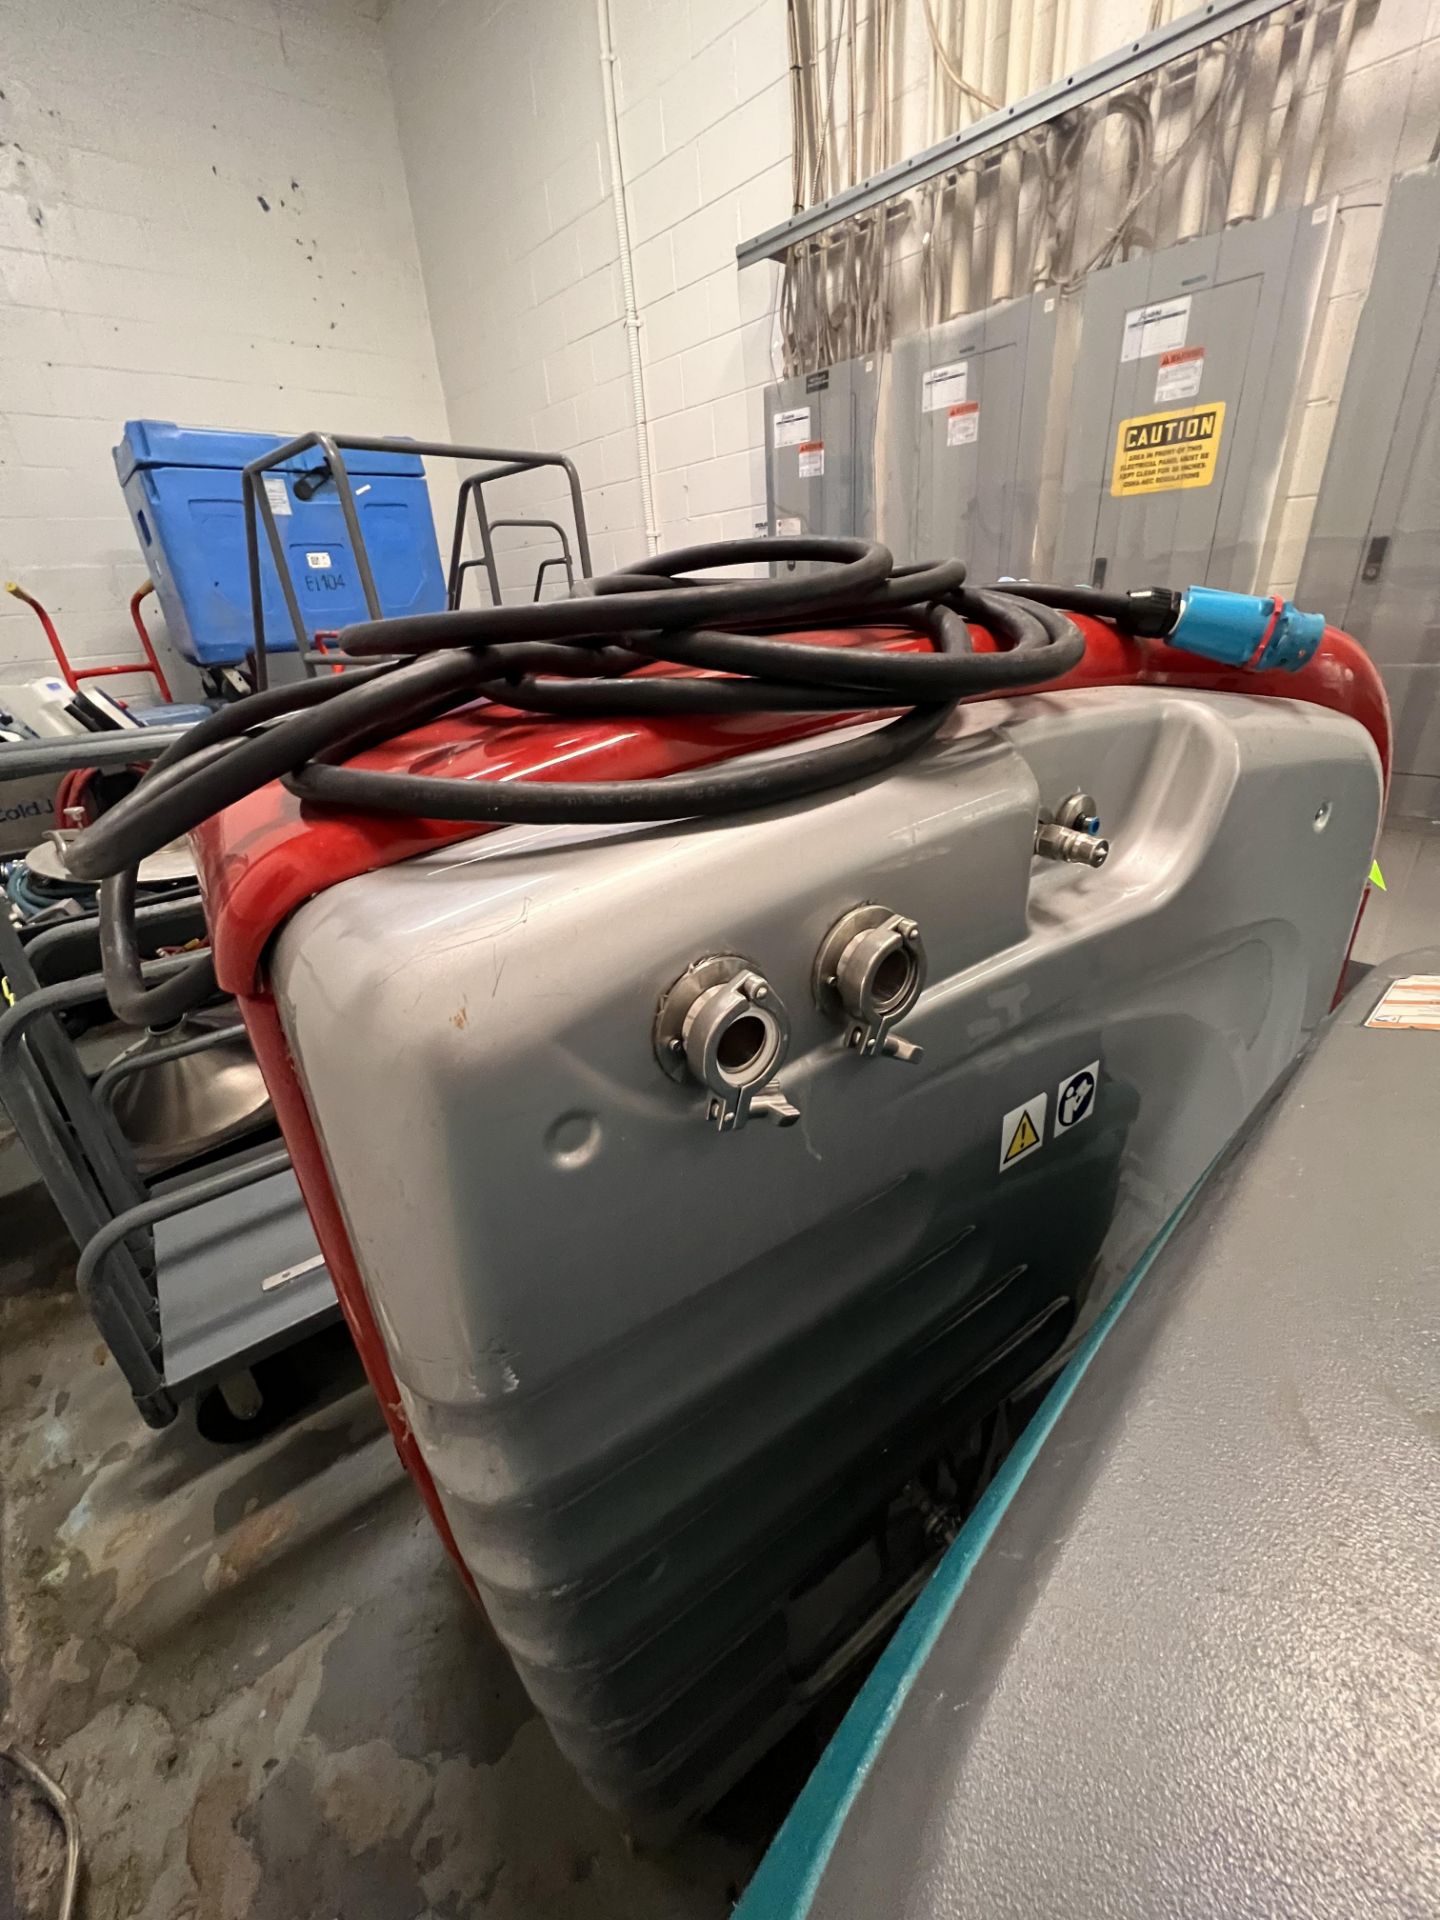 2019 IWT CLEANING EXCELLENCE CIP HP MOBILE WASHER 040, MODEL 9HPMS40, S/N 151152 - Image 5 of 27